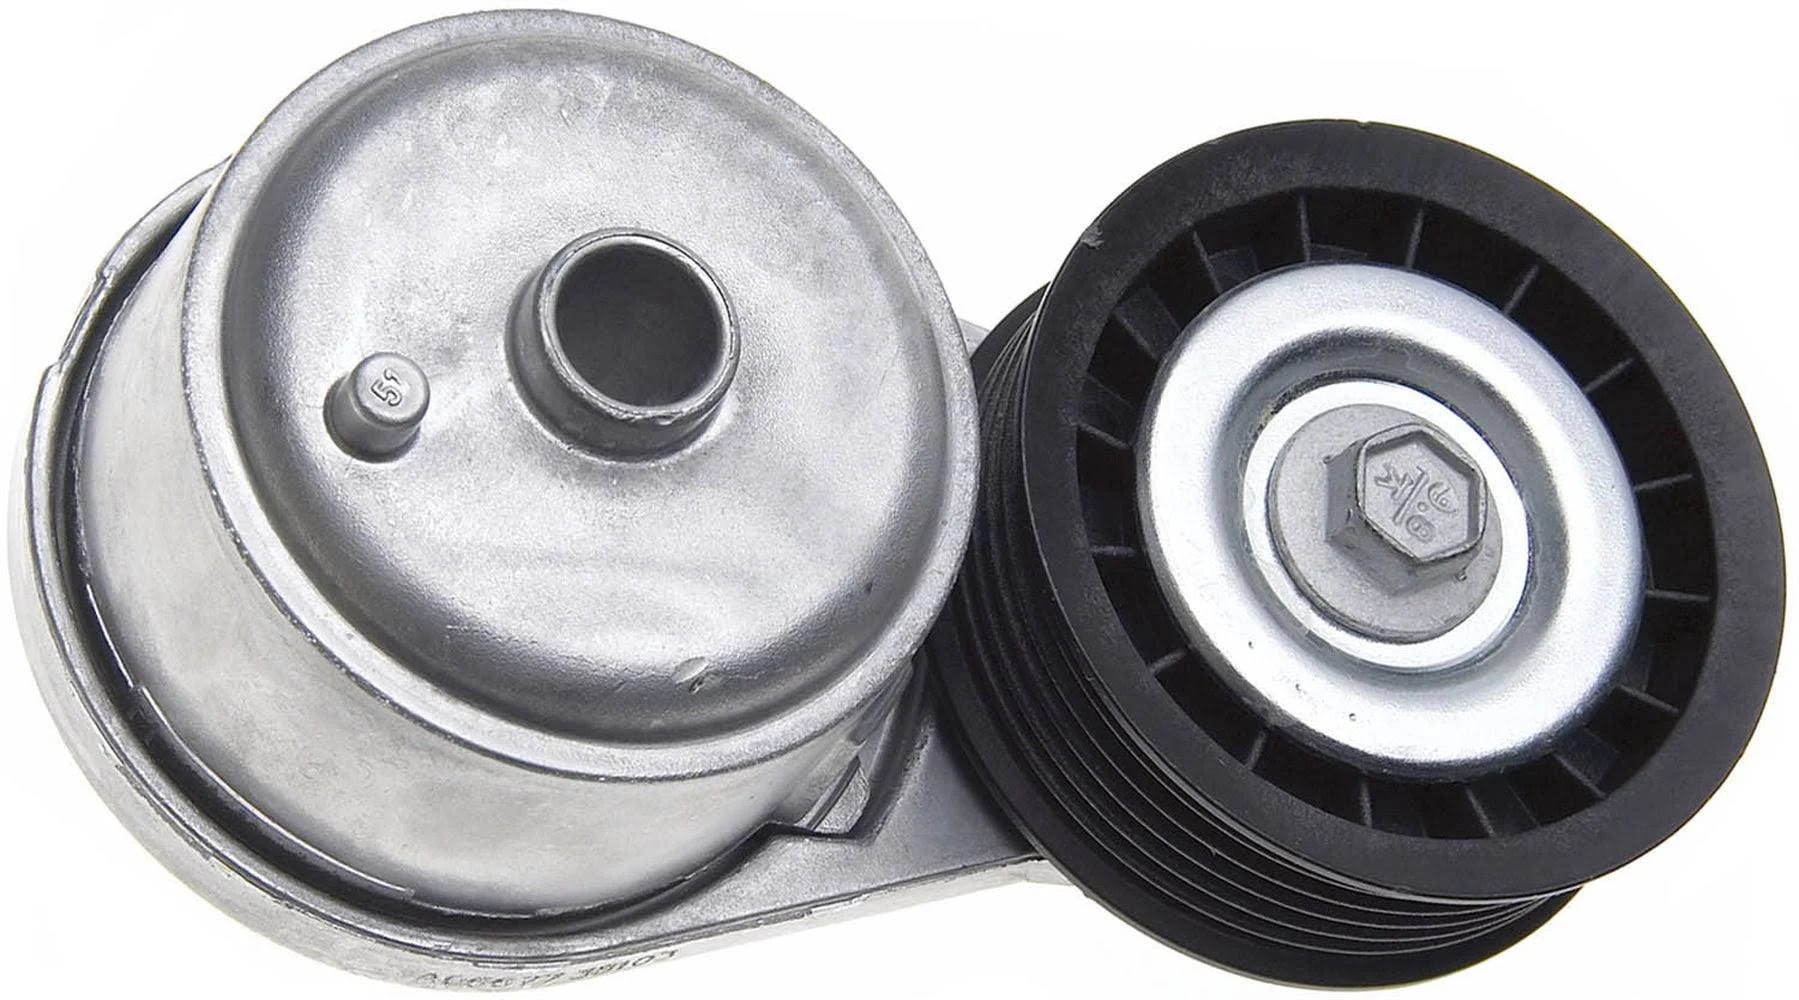 Gates Belt Drive Tensioner for Accessory Belt Systems | Image